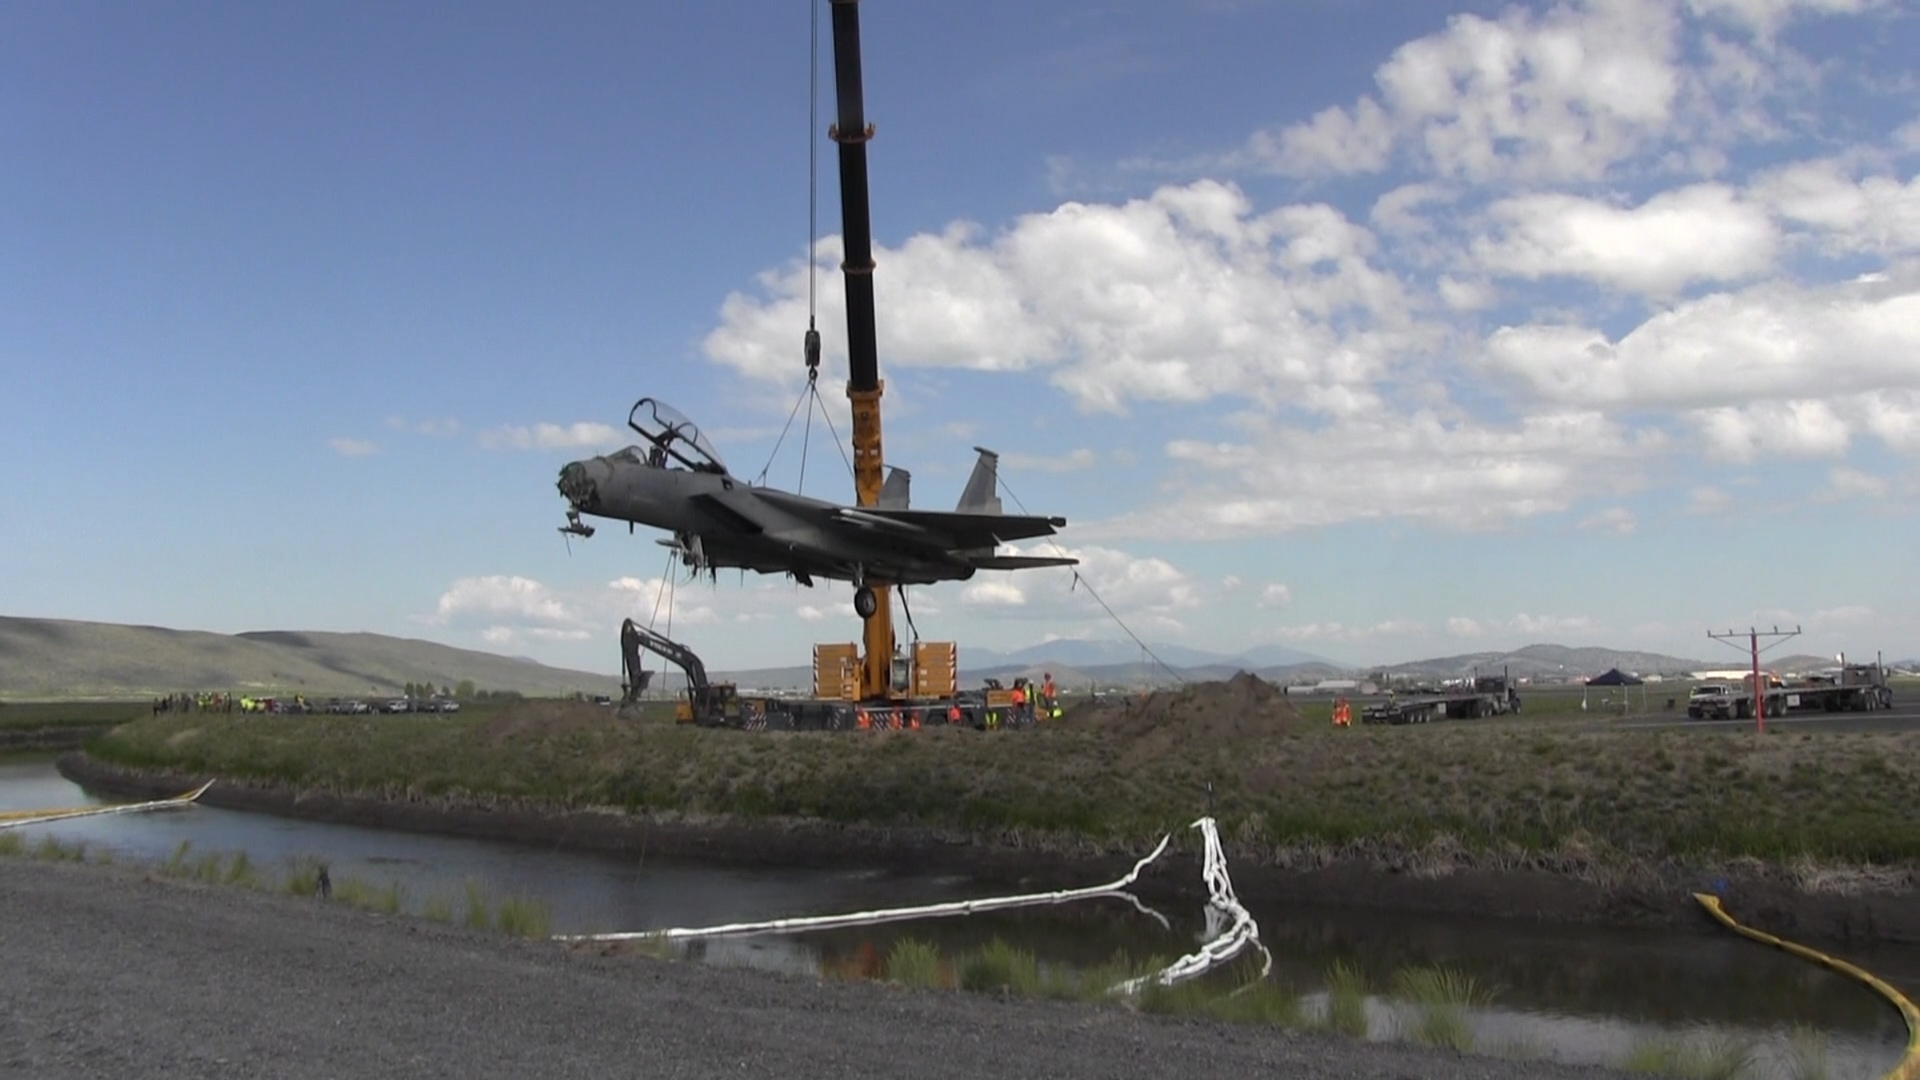 Airmen From The Disabled  Aircraft  Recovery Team  Recovered The U.S. Air Force F-15D aircraft From  Irrigation canal  Of  Klamath Falls. 